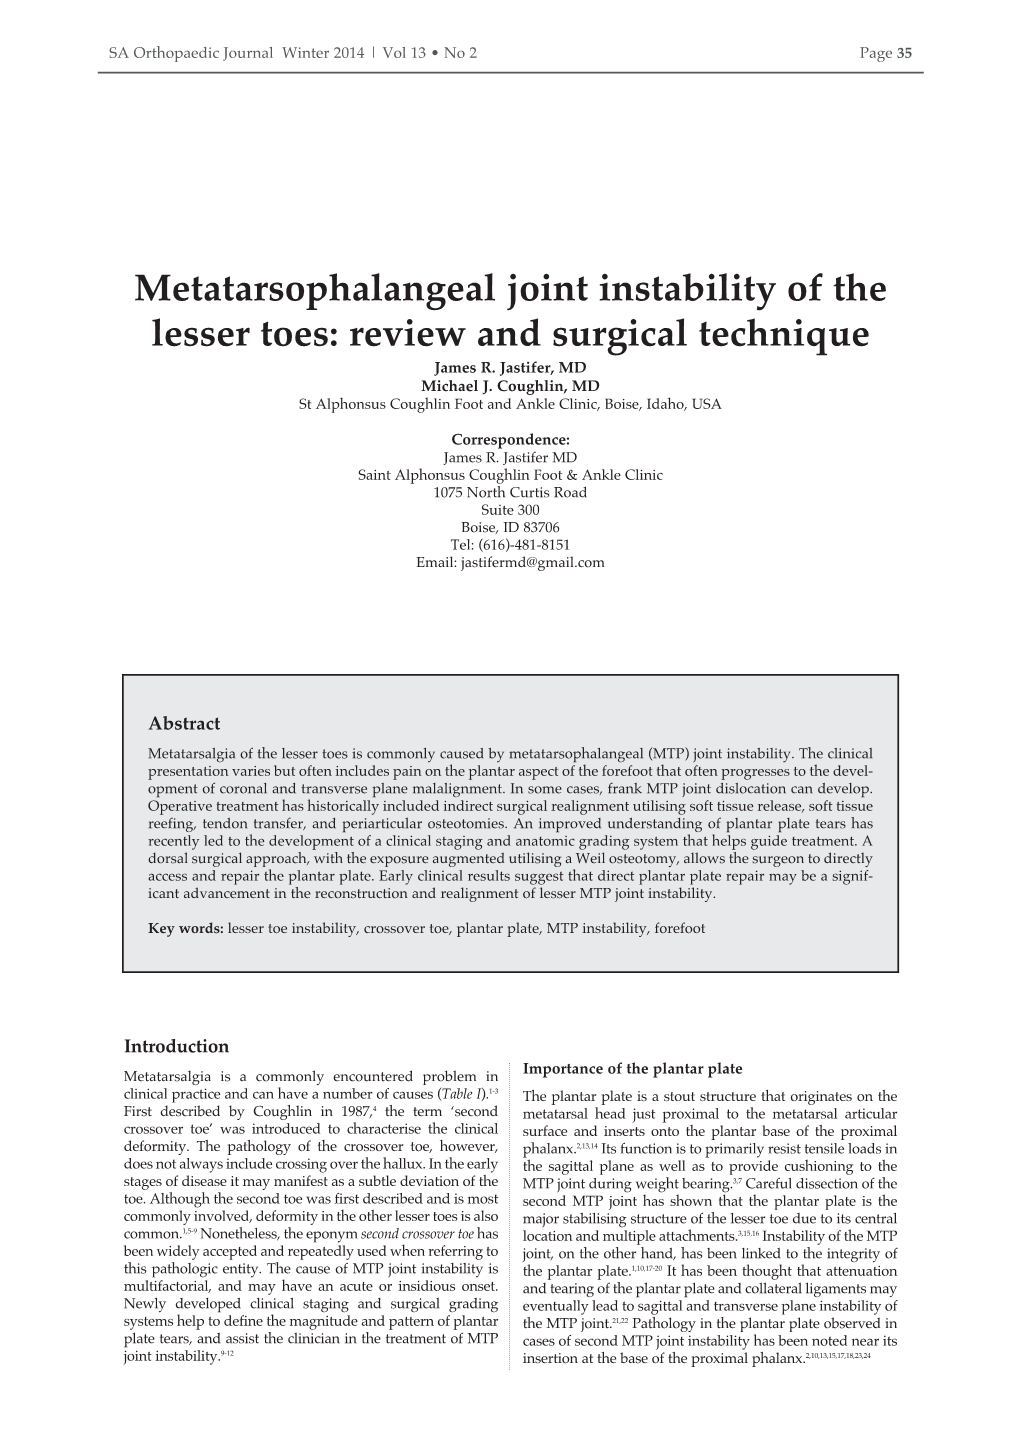 Metatarsophalangeal Joint Instability of the Lesser Toes